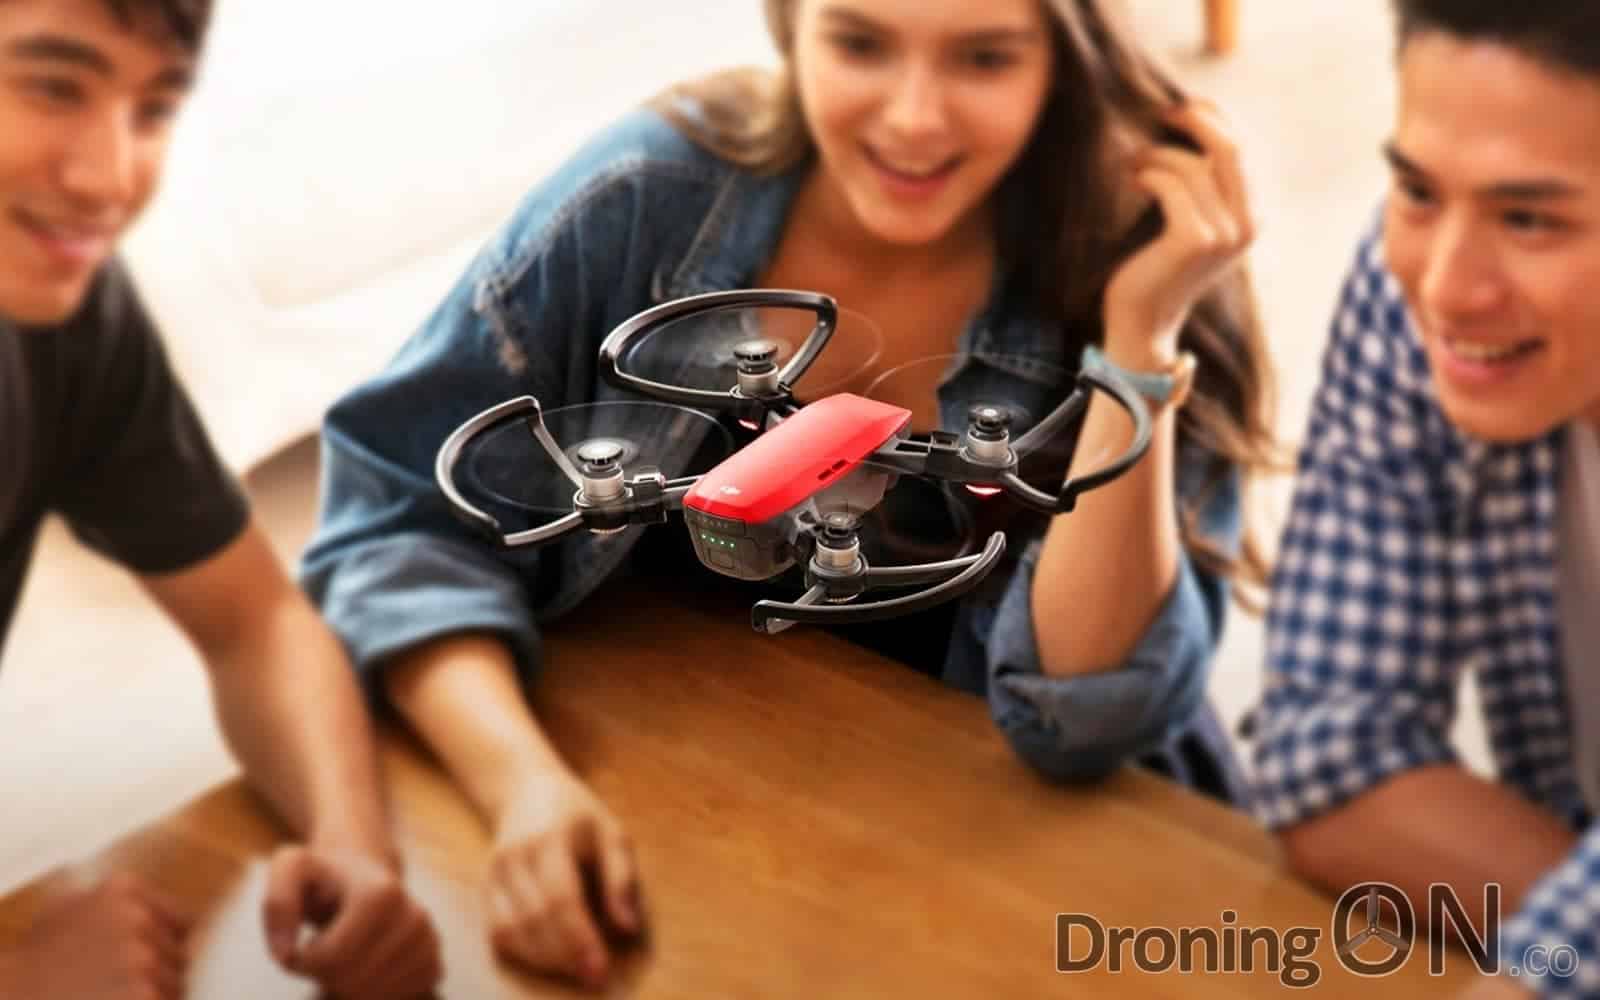 DJI launch the DJI Spark drone, a portable drone for selfies.